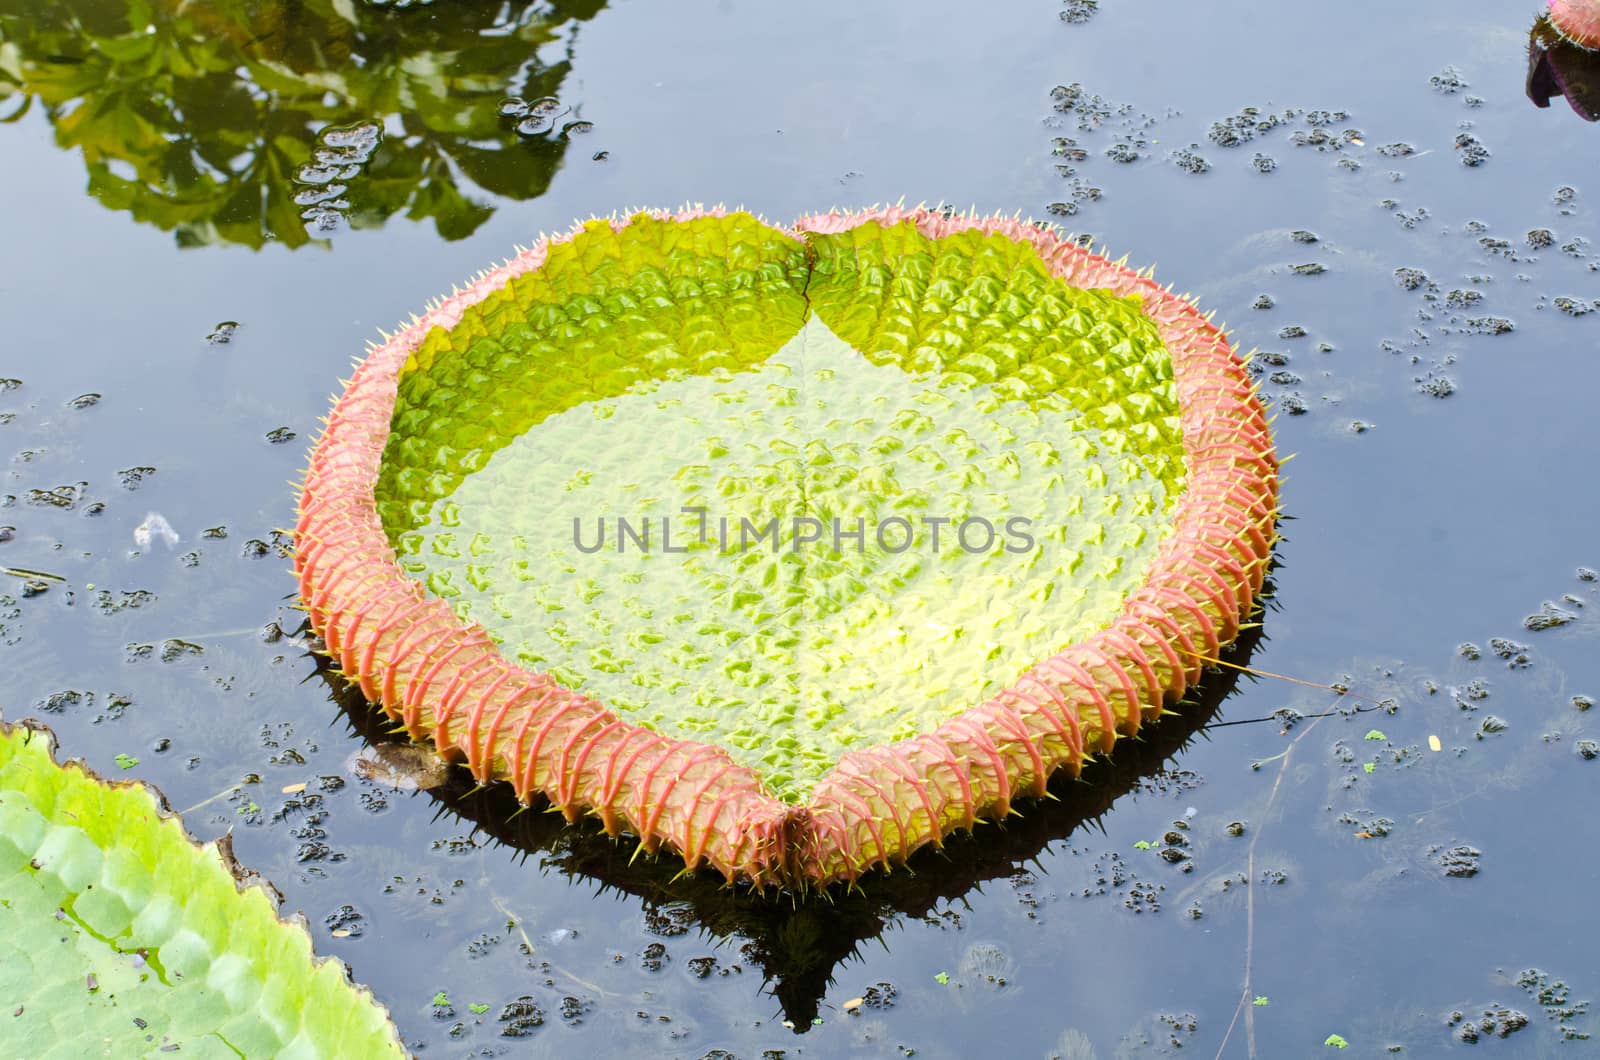 Giant leaves of the Victoria waterlily in pond